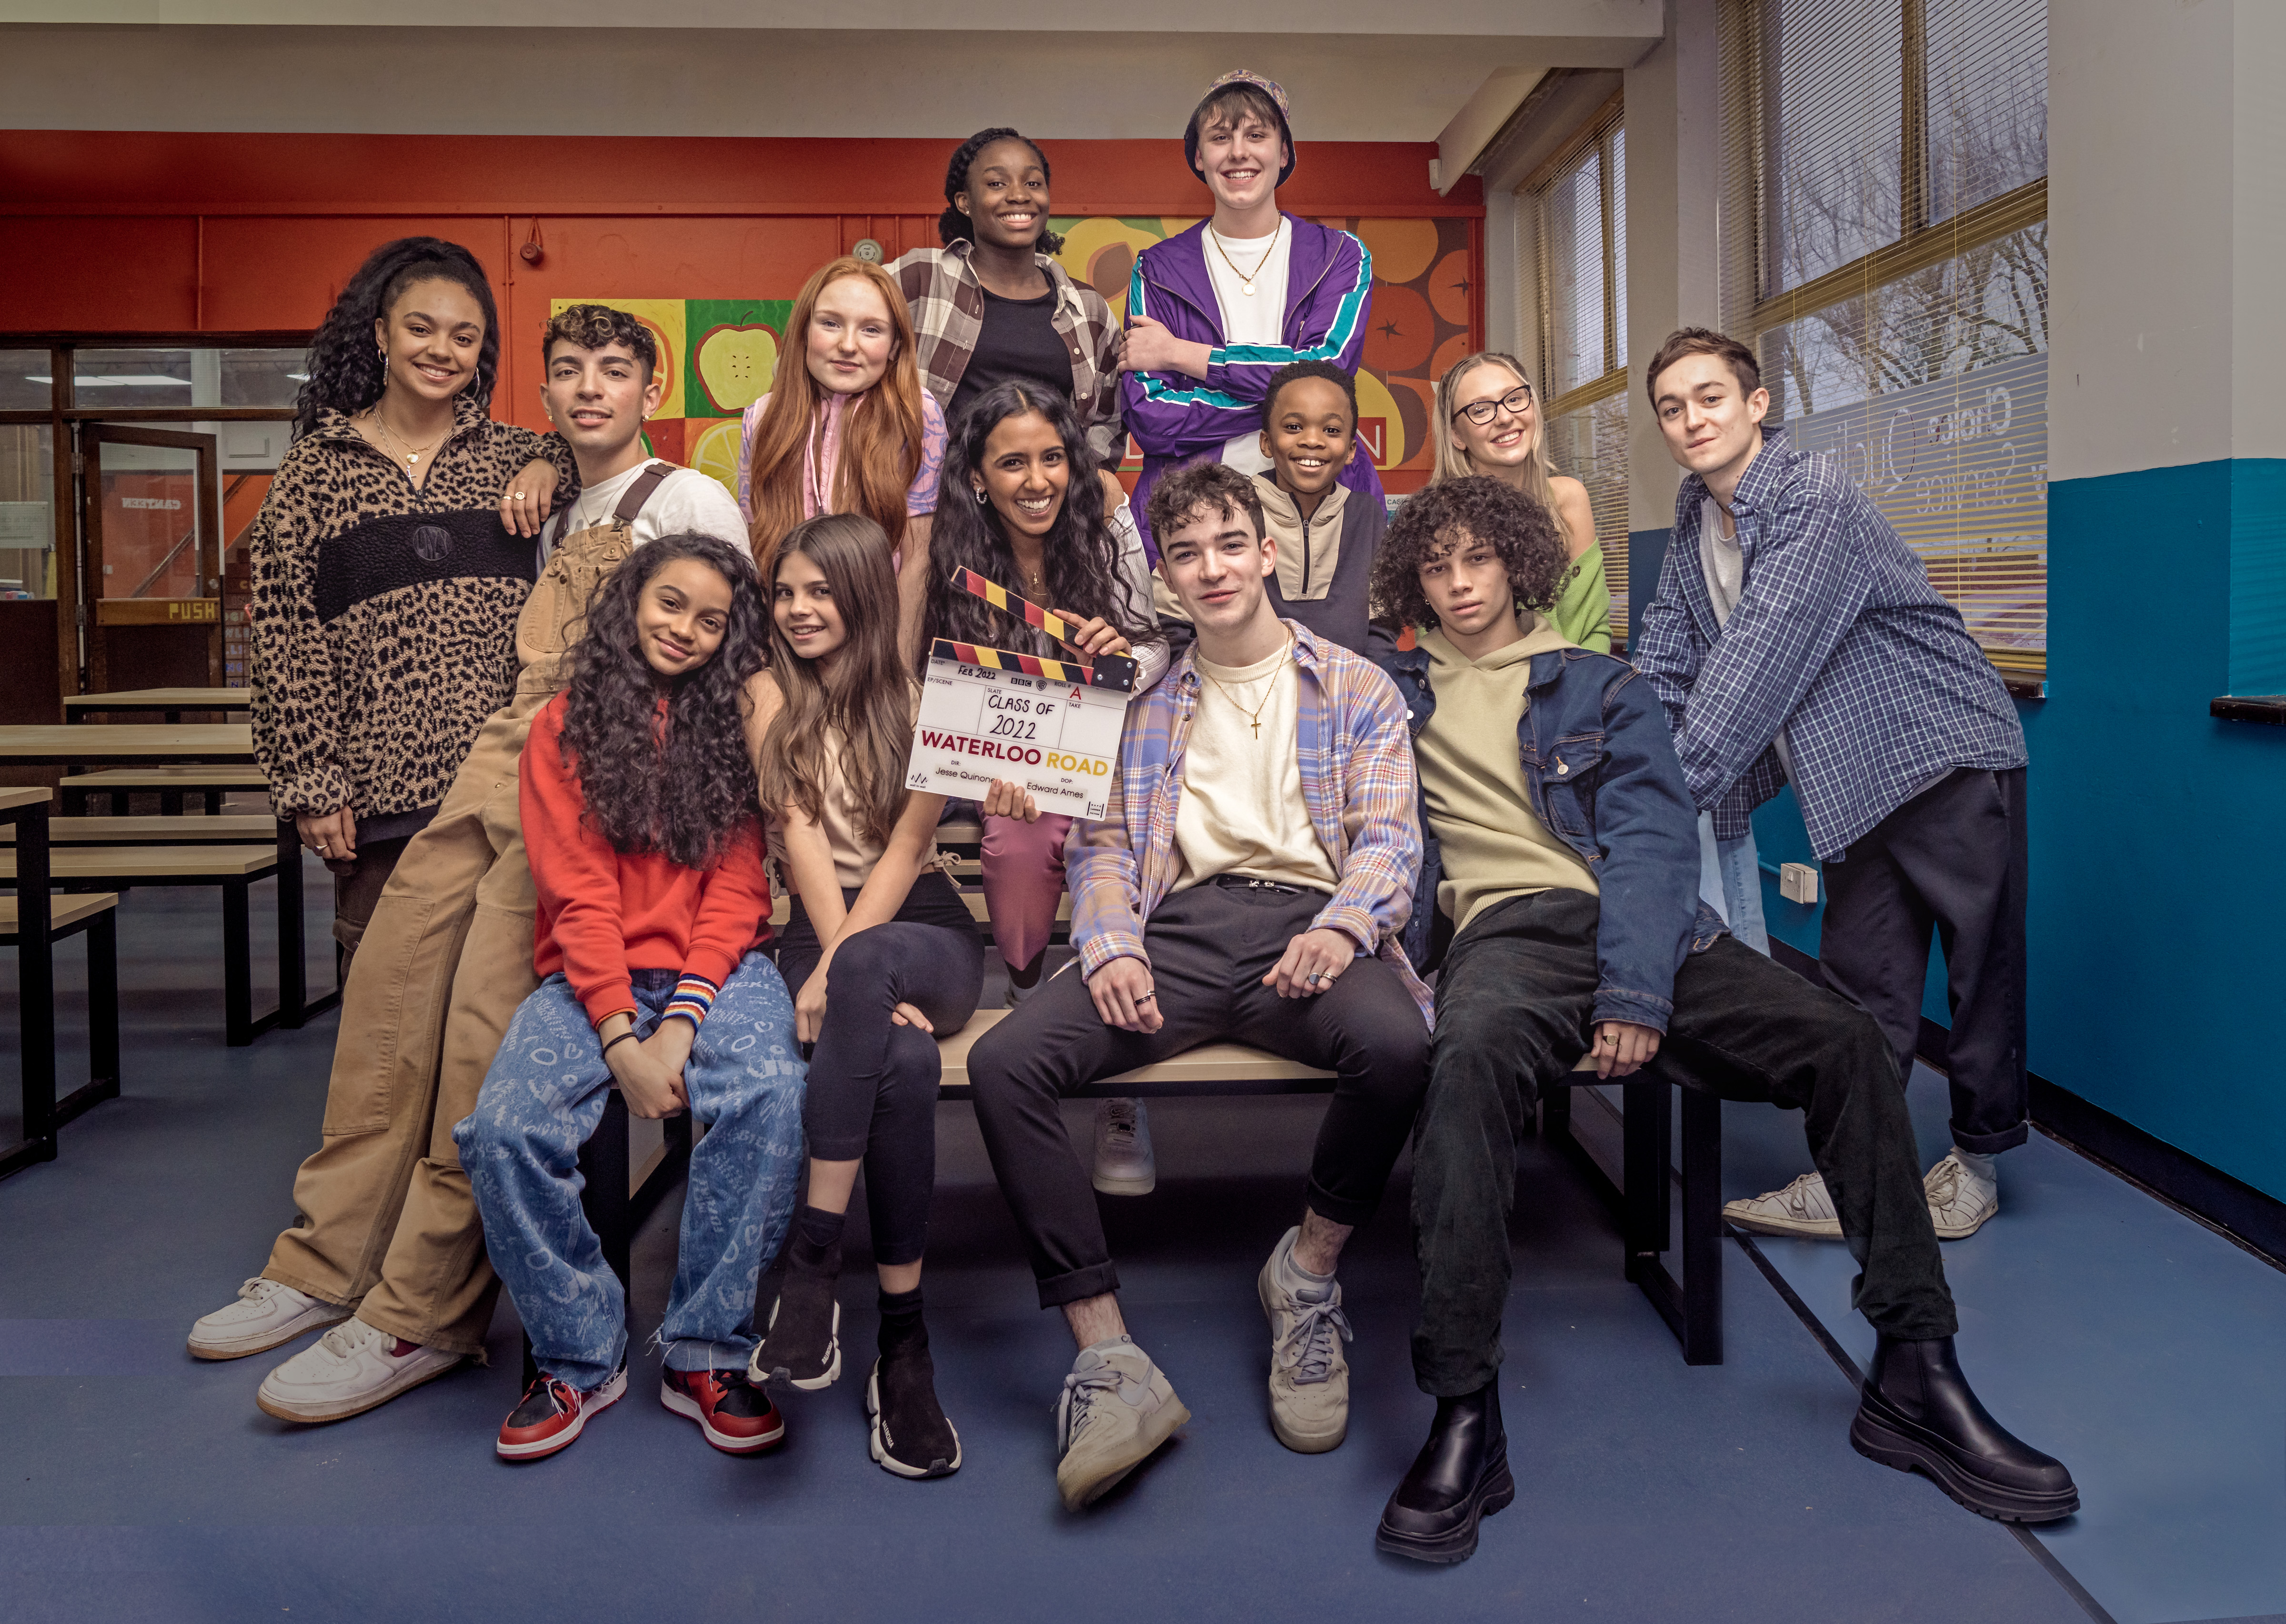 The new cast of Waterloo Road pupils